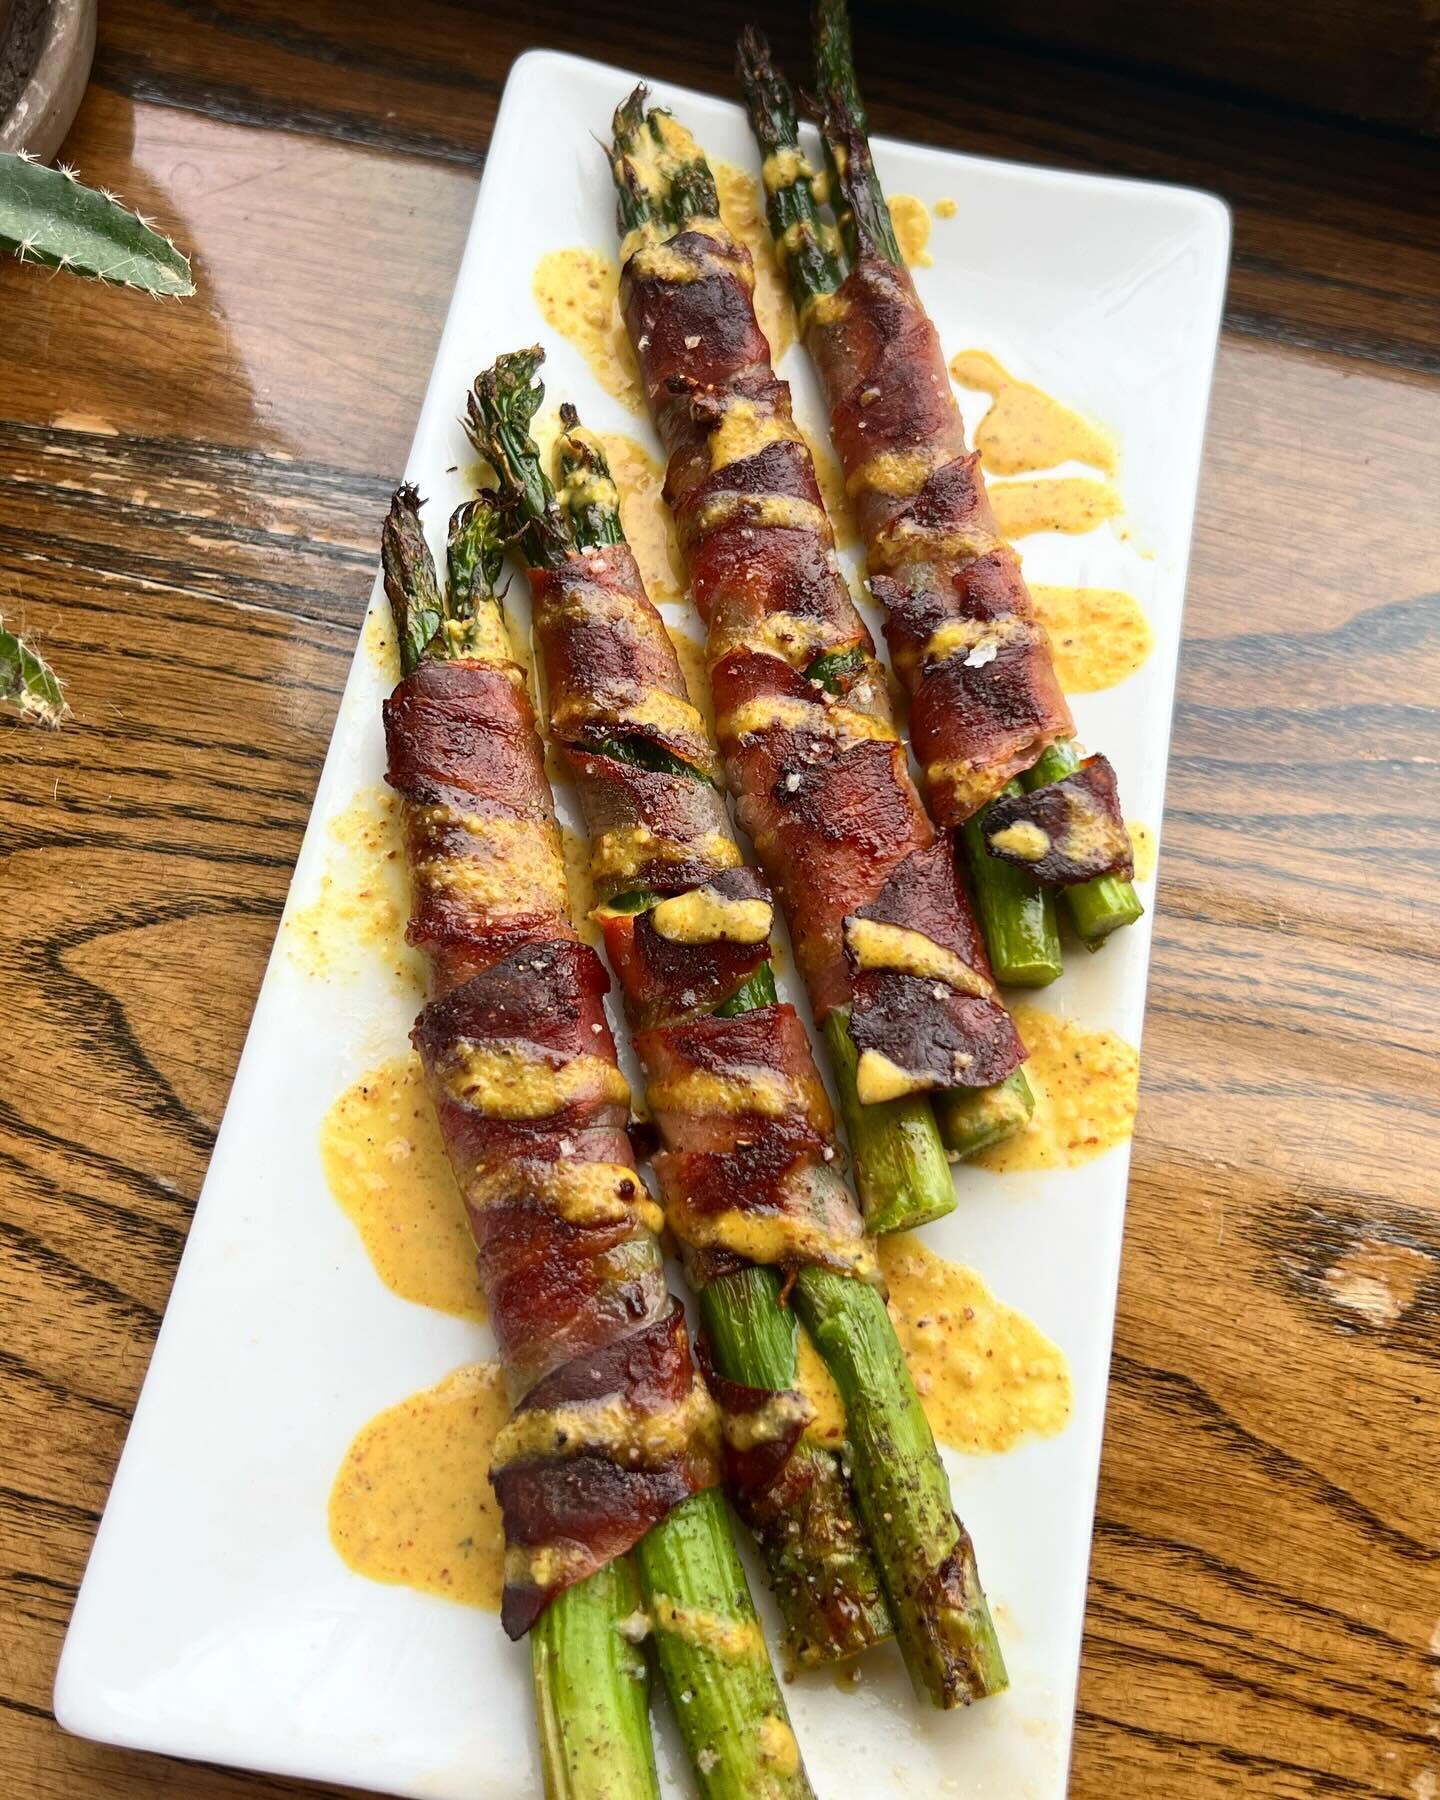 So many tasty specials to start your weekend off right!

💥Wood-fired speck-wrapped asparagus topped with a lemon ginger puree (*contains nuts*)
🥗artisan lettuce, crispy speck, black radish, @kuriosfarms cucumbers, pickled leeks, calabrian pepper vi